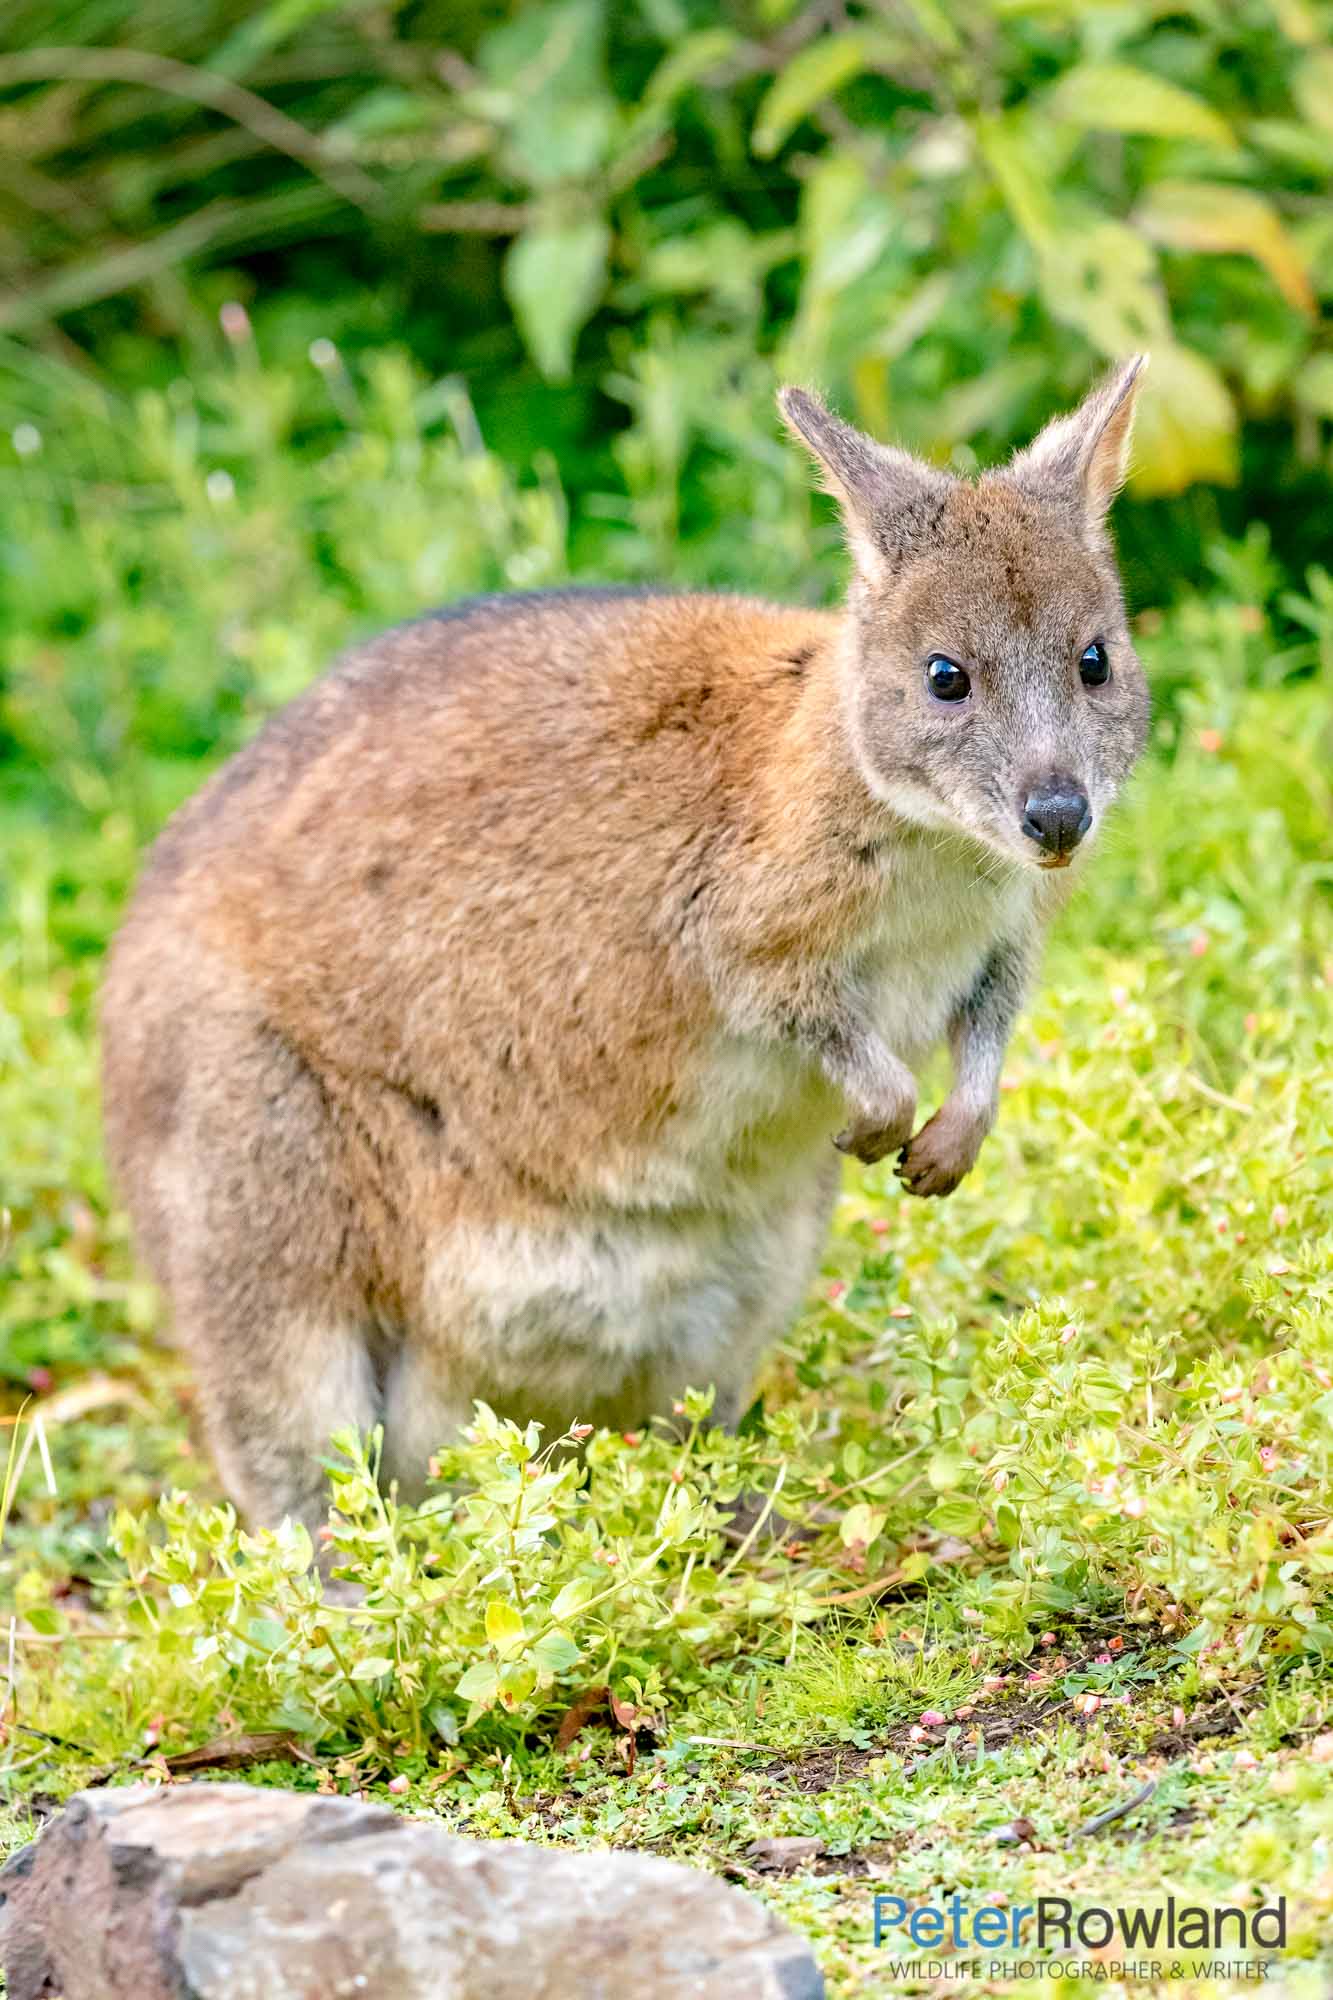 A Red-necked Pademelon in a grassy clearing looking toward the camera. [Photographed by Peter Rowland]